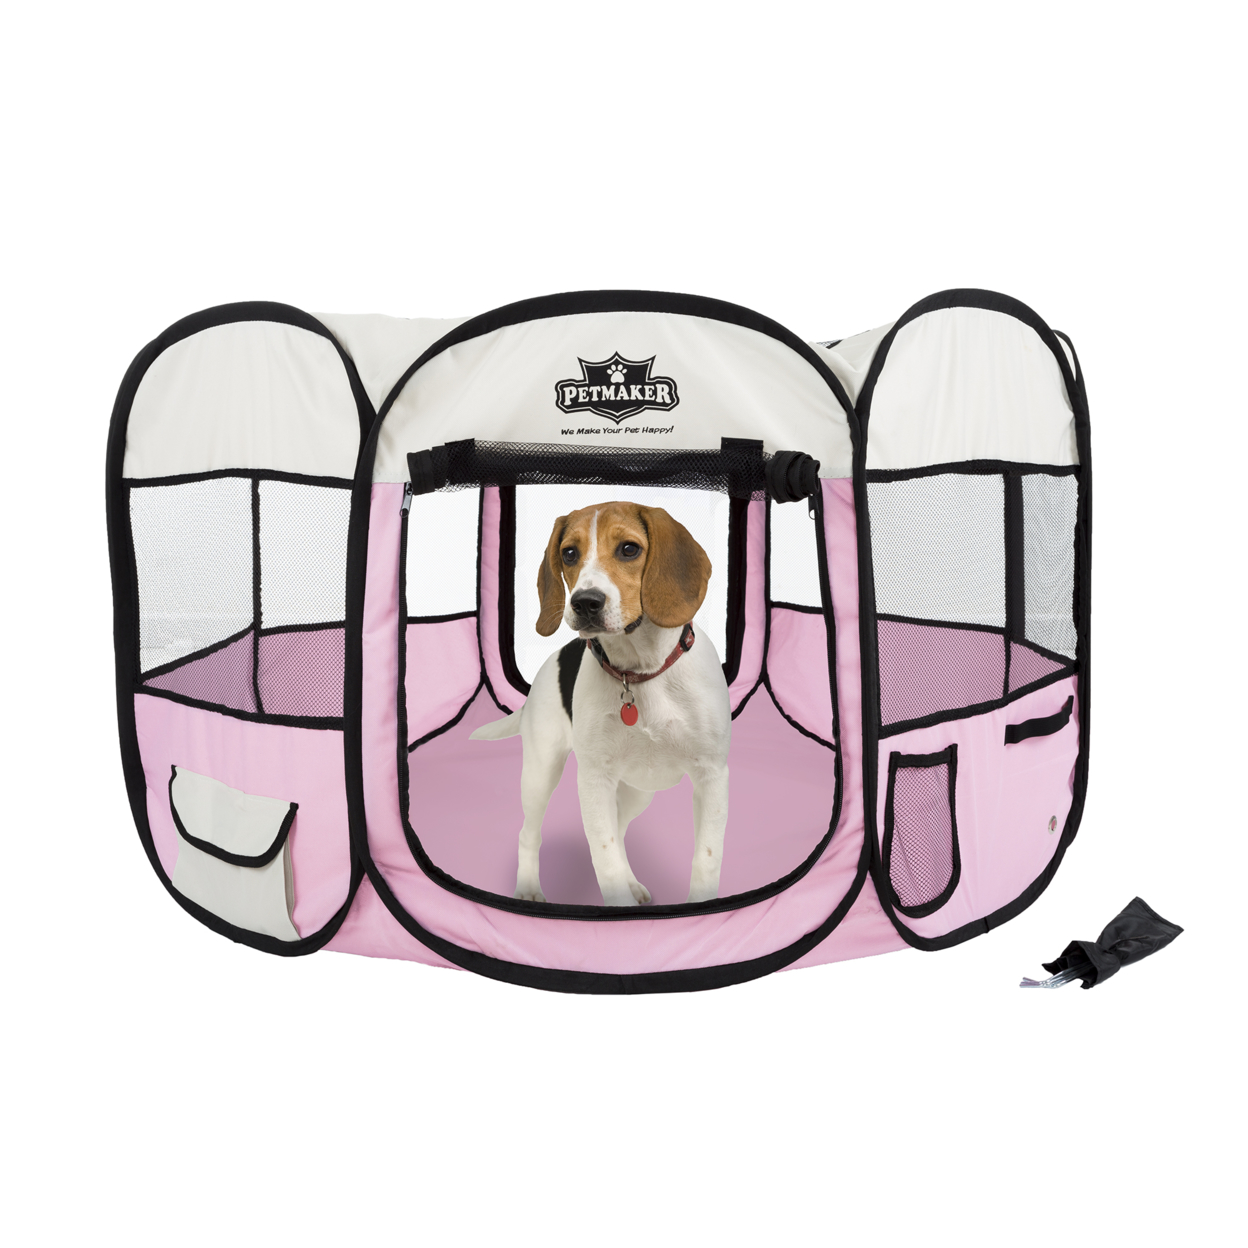 Portable Pop Up Pet Play Pen With Carrying Bag 38in Diameter 24in Pink By PETMAKER